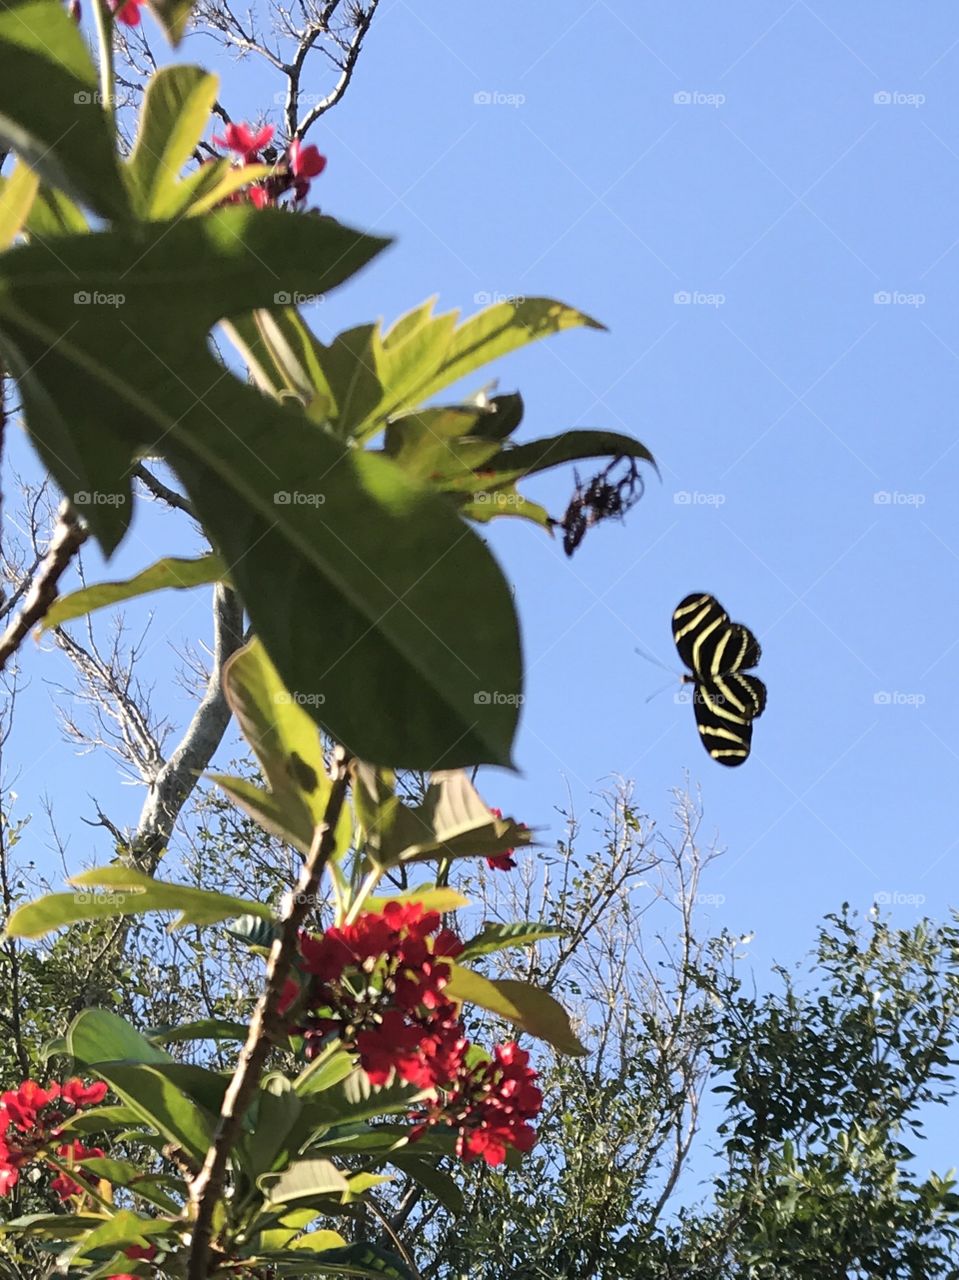 Butterfly in nature 